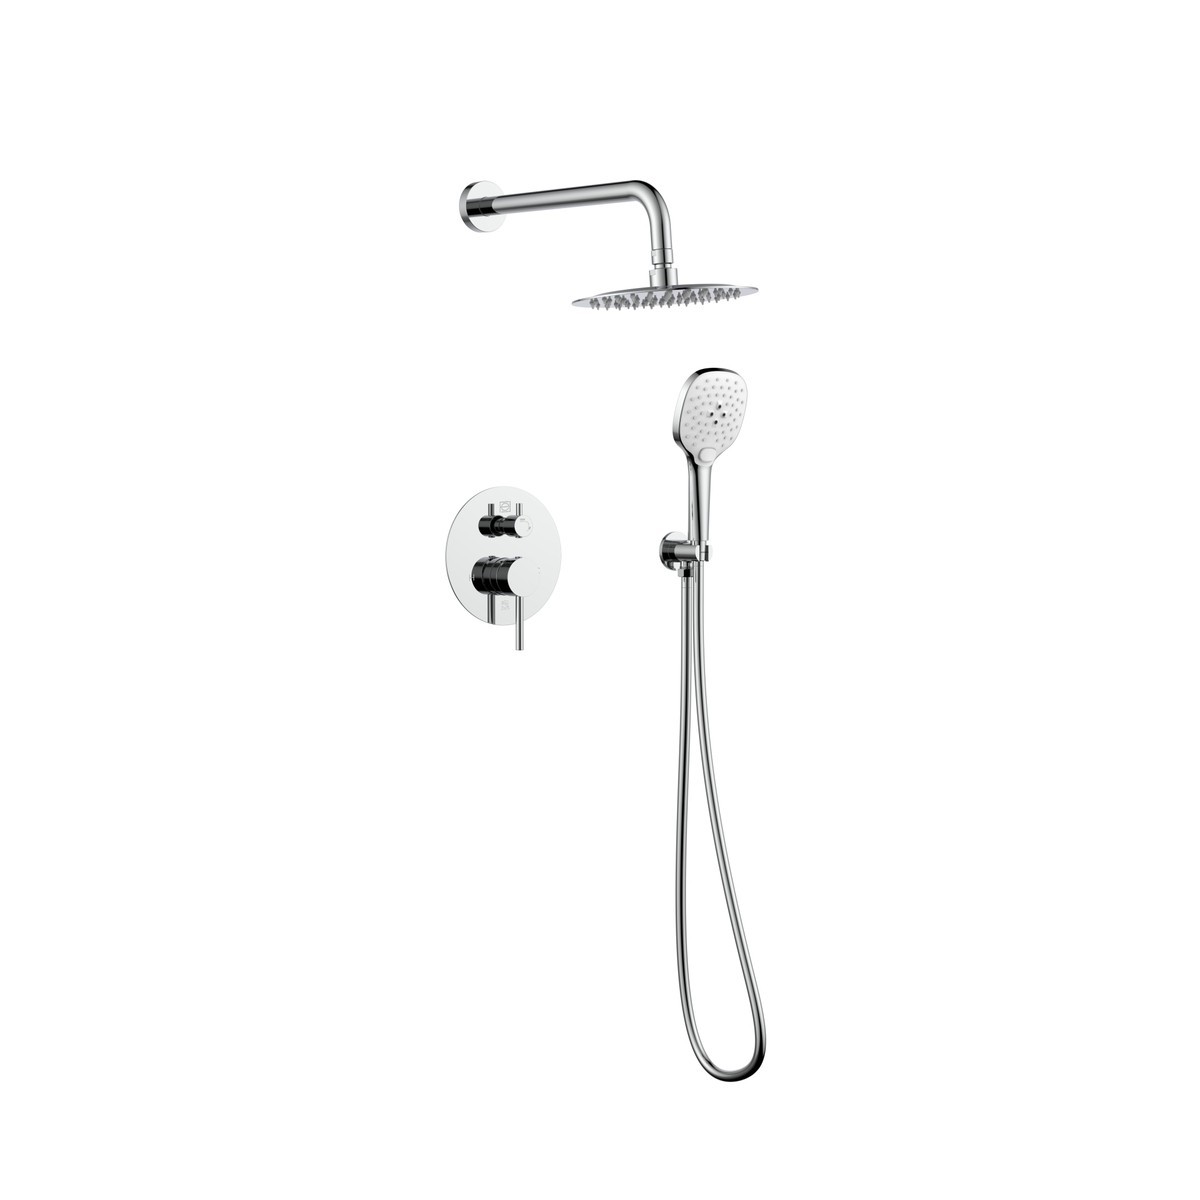 ELEGANT FURNITURE LIGHTING FAS-9001 GEORGE 8 INCH COMPLETE SHOWER SYSTEM WITH ROUGH-IN VALVE